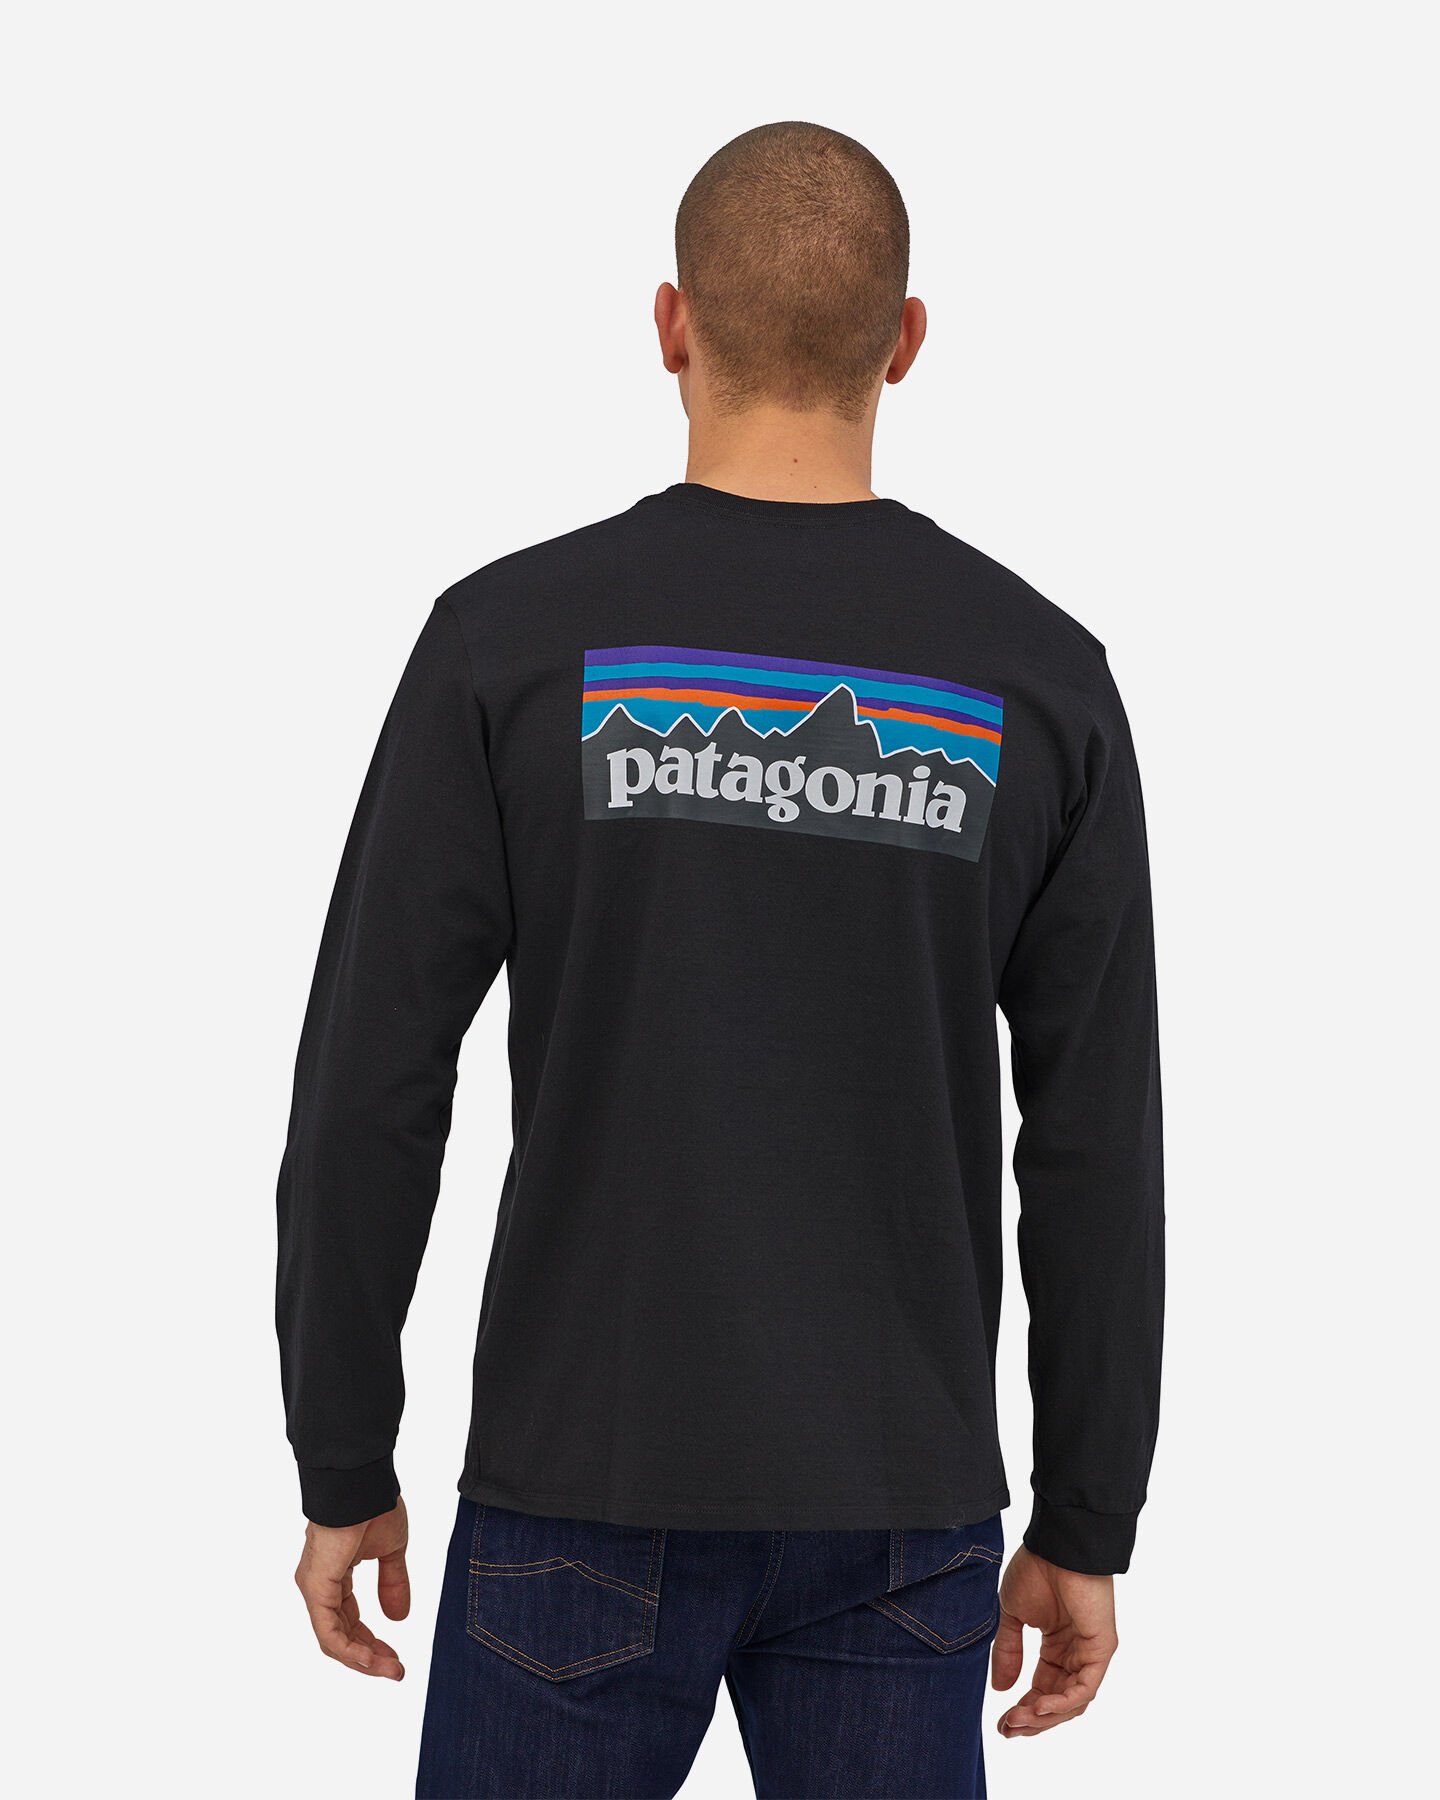  T-Shirt PATAGONIA P-6 LOGO M S4089229|BLK|L scatto 1